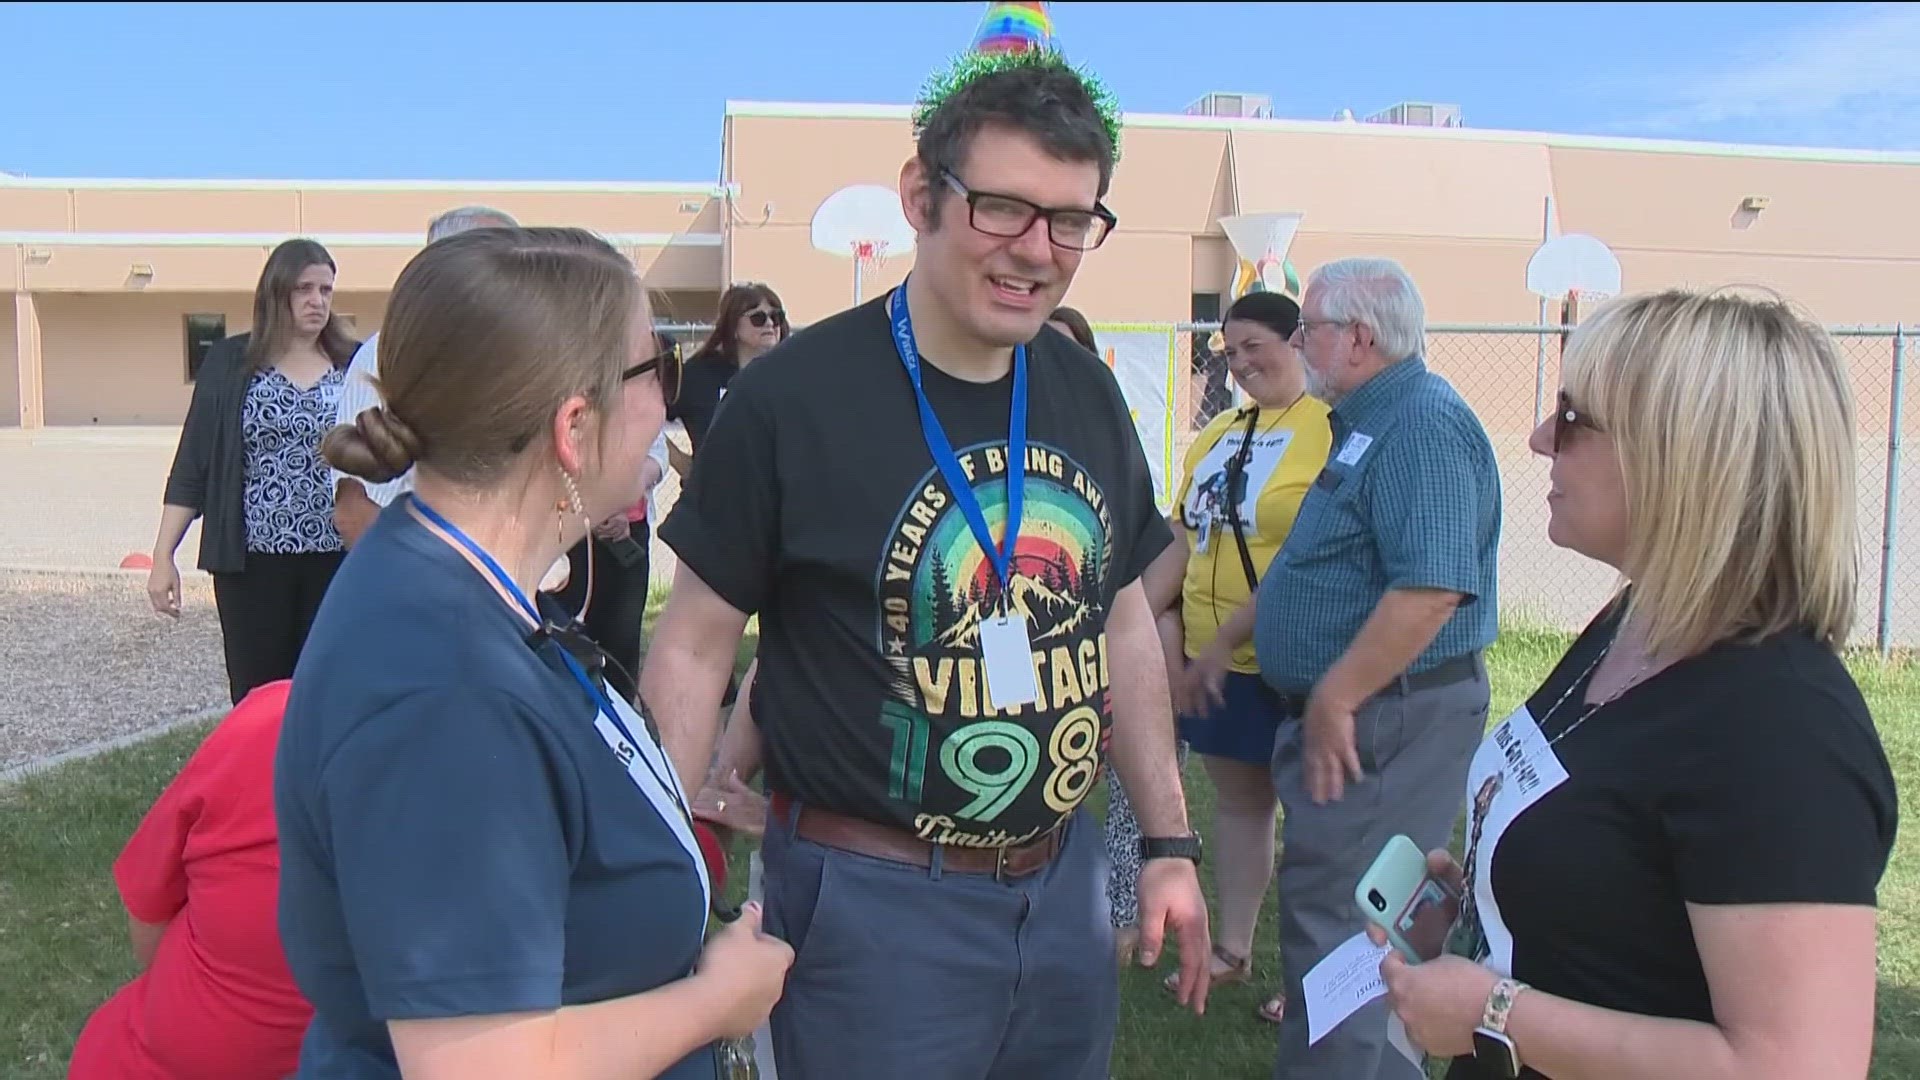 Corey Holaday went to school at Frontier Elementary, and he's volunteered there for his whole adult life. The school celebrated his 40th birthday in style!